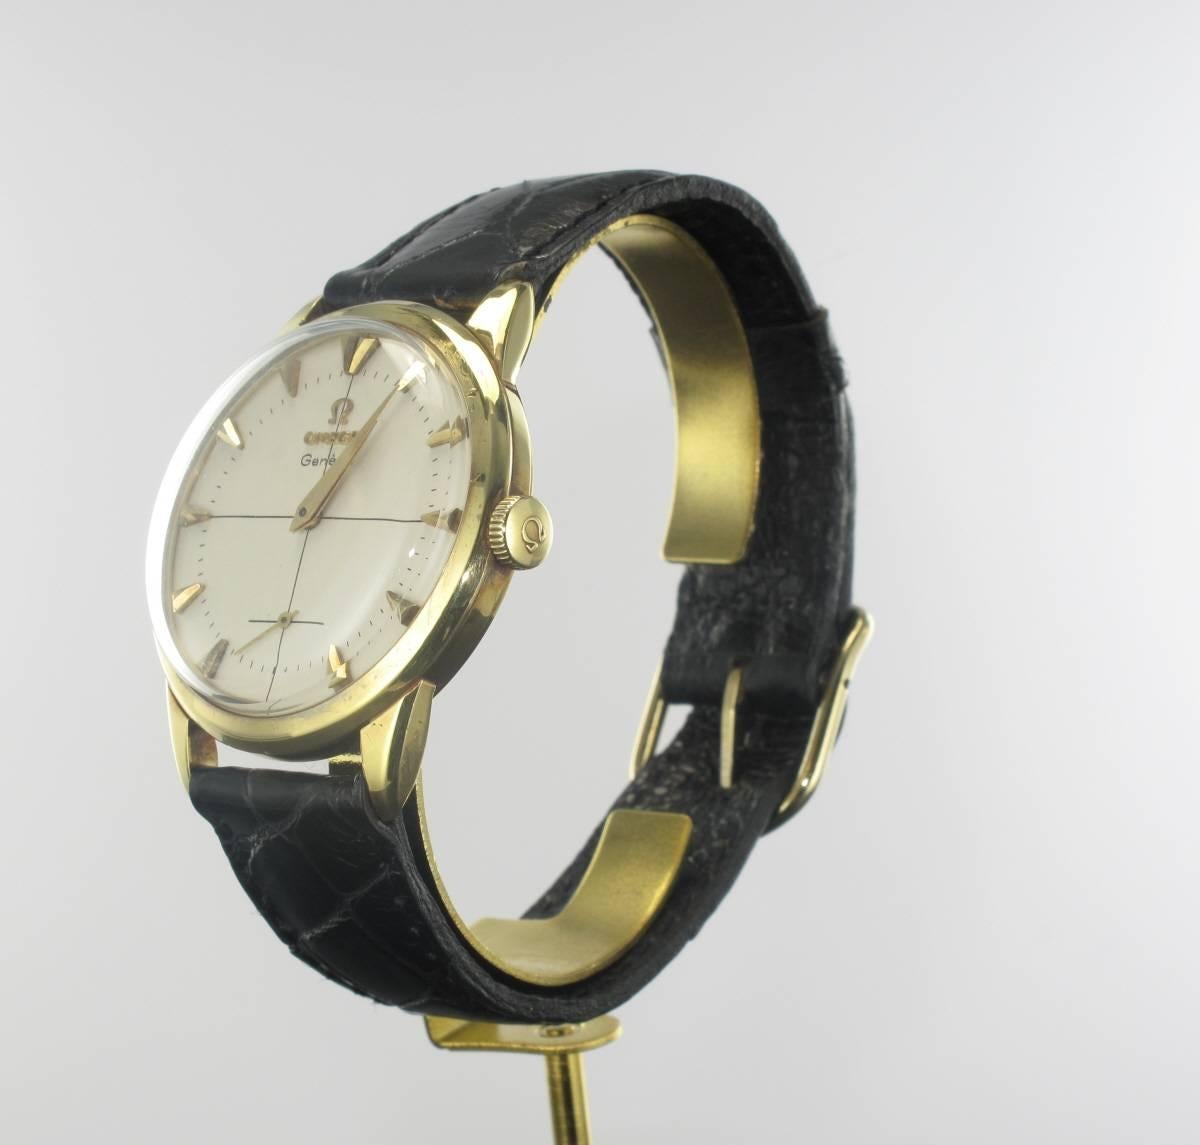 Omega watch.
Round case in 18 carats yellow gold.
Automatic mechanical watch.
Cream background.
Black crocodile leather strap.
Vintage watch from the 60s.
Total length: 23.2 cm, bracelet width: 1.7 cm. Case diameter: 3.5 cm, thickness: 1 cm.
Total